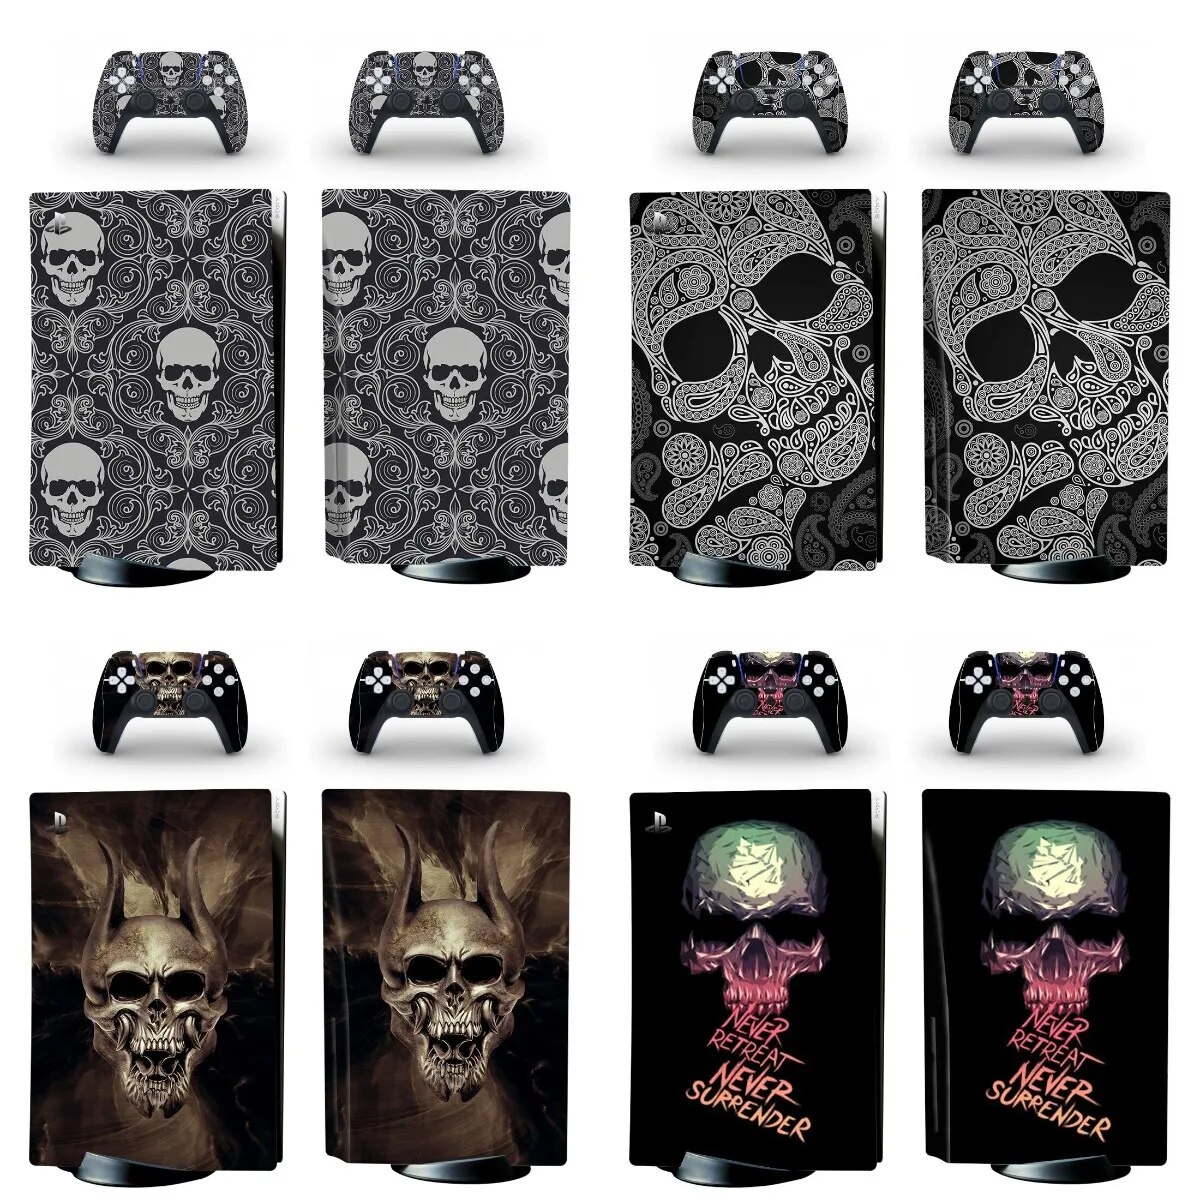 【New-store】 Creative Skull Ps5 Disc Edition Skin Sticker Decal Cover For 5 Console Controller Skin Sticker Vinyl